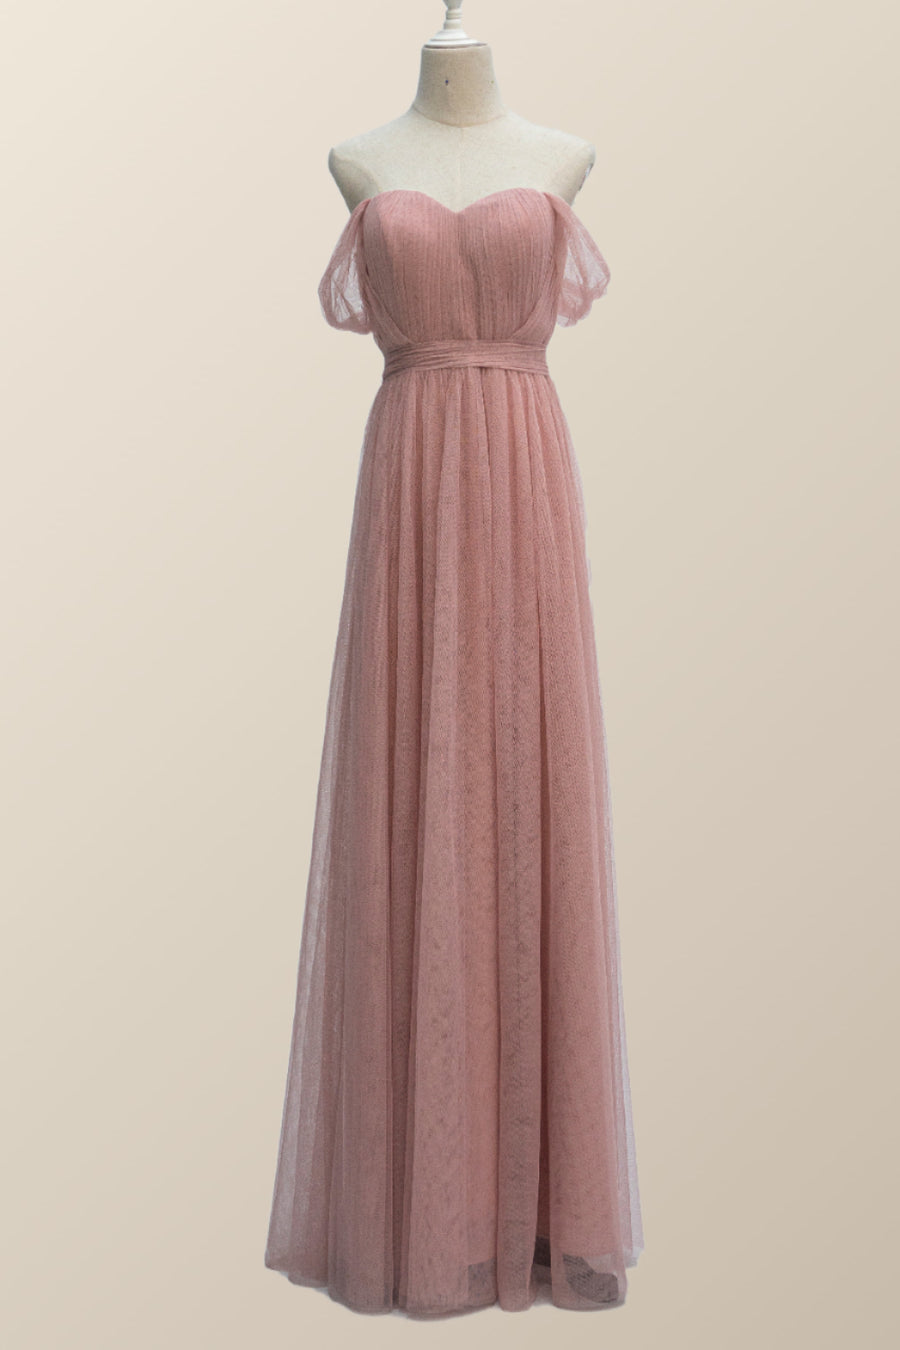 Empire Blush Pink Tulle A-line Long Bridesmaid Dress